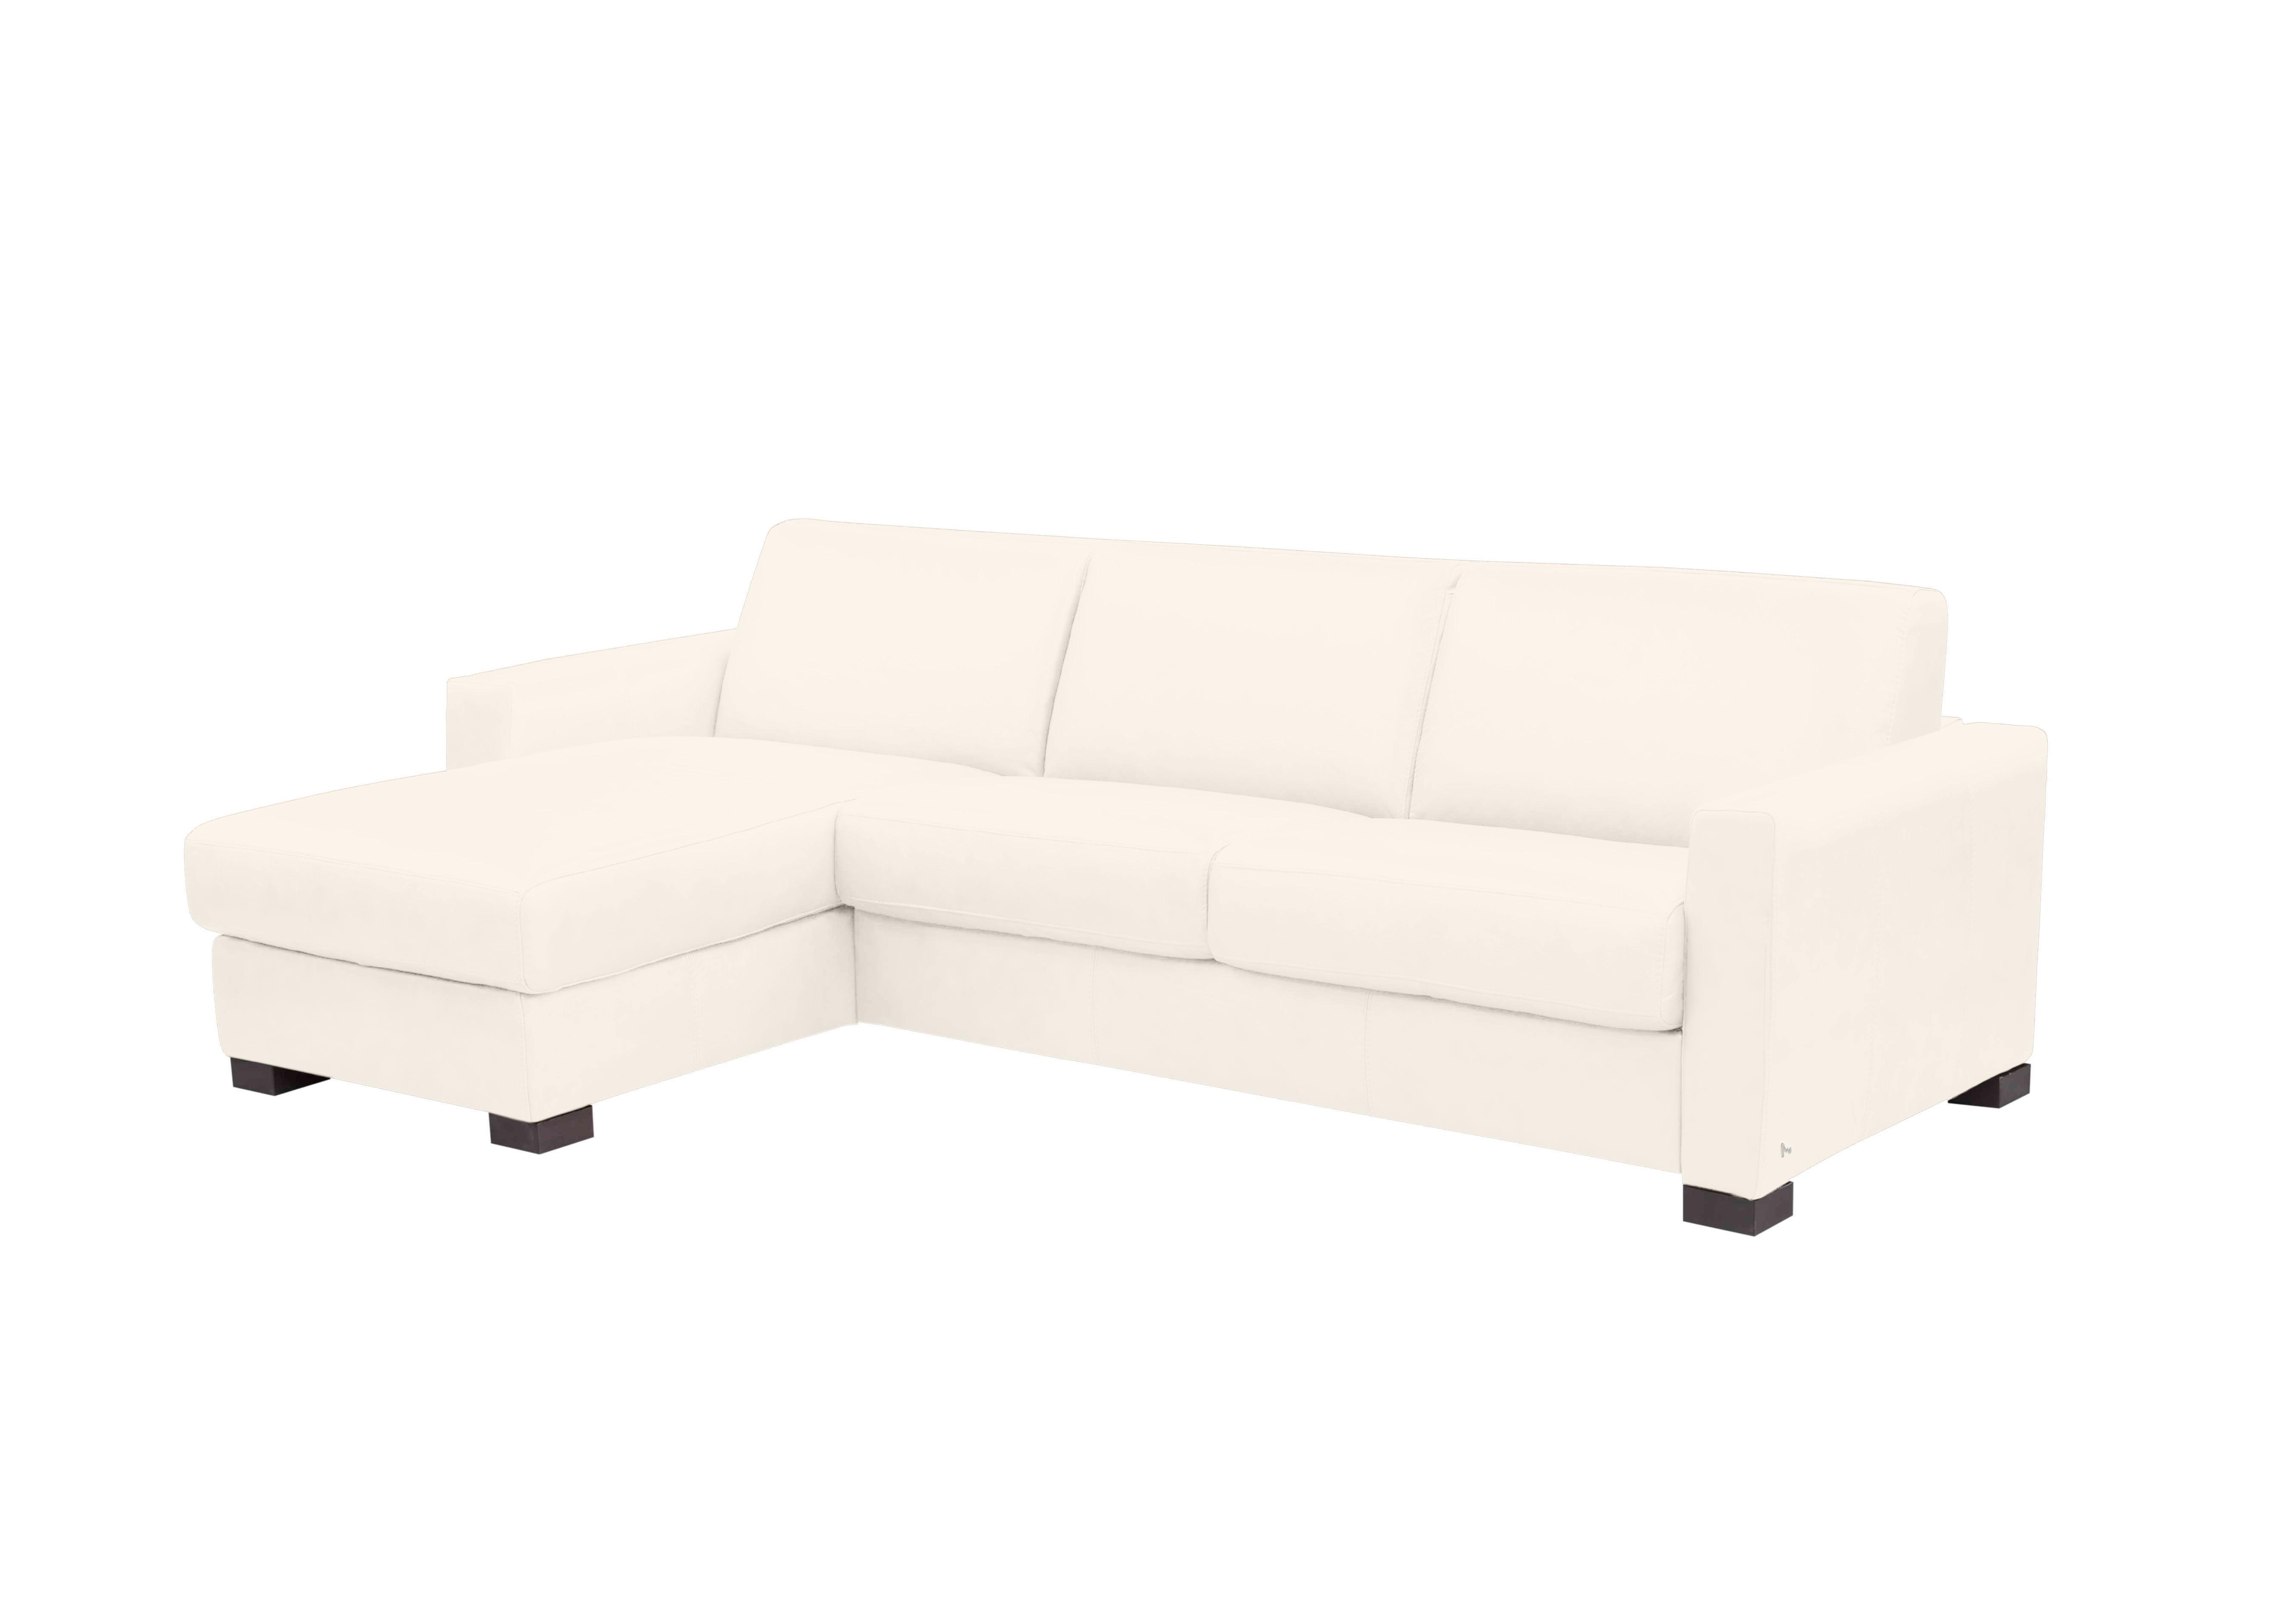 Alcova 3 Seater Leather Sofa Bed with Storage Chaise and Box Arms in Torello Bianco 93 on Furniture Village